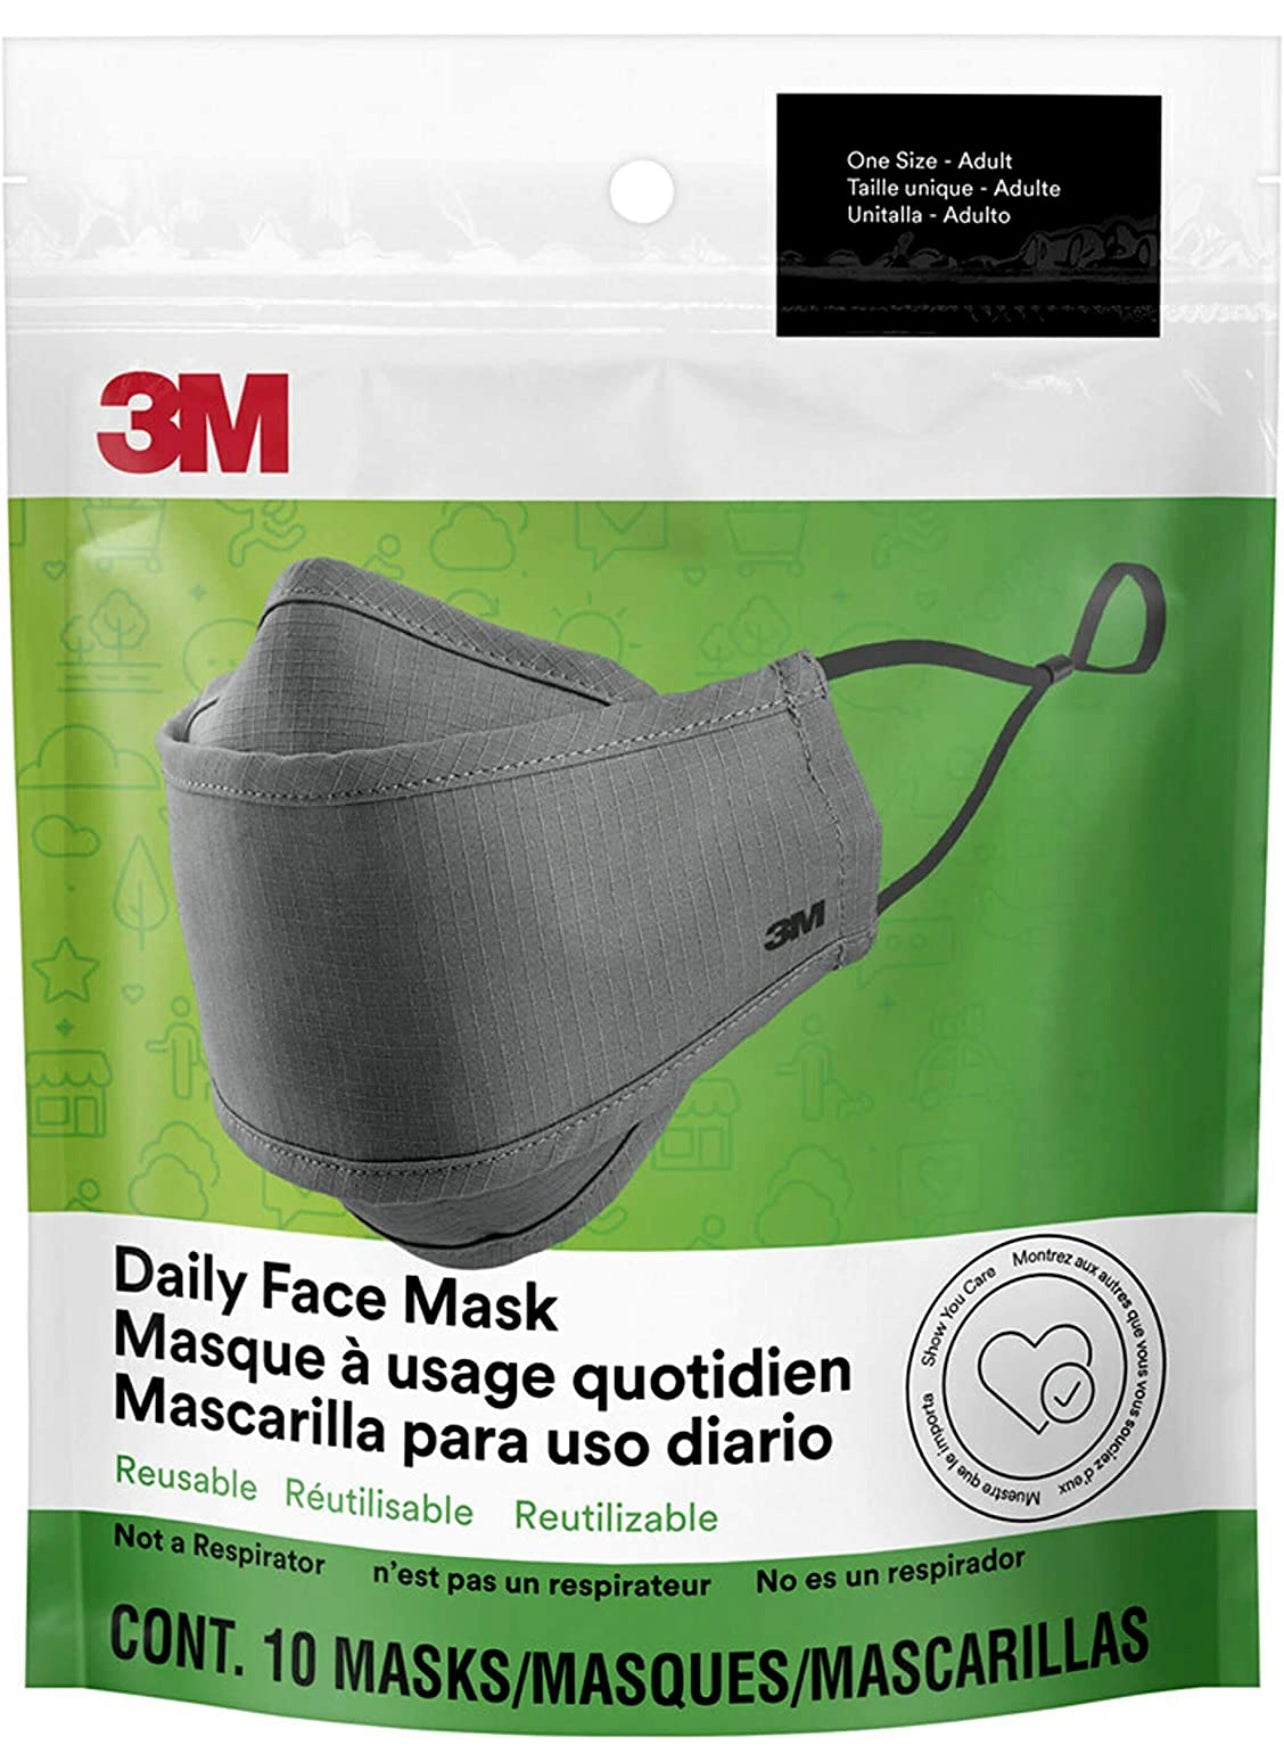 3M Daily Face Mask, Reusable, Washable, Lightweight Cotton Fabric, 10 Pack, Gray